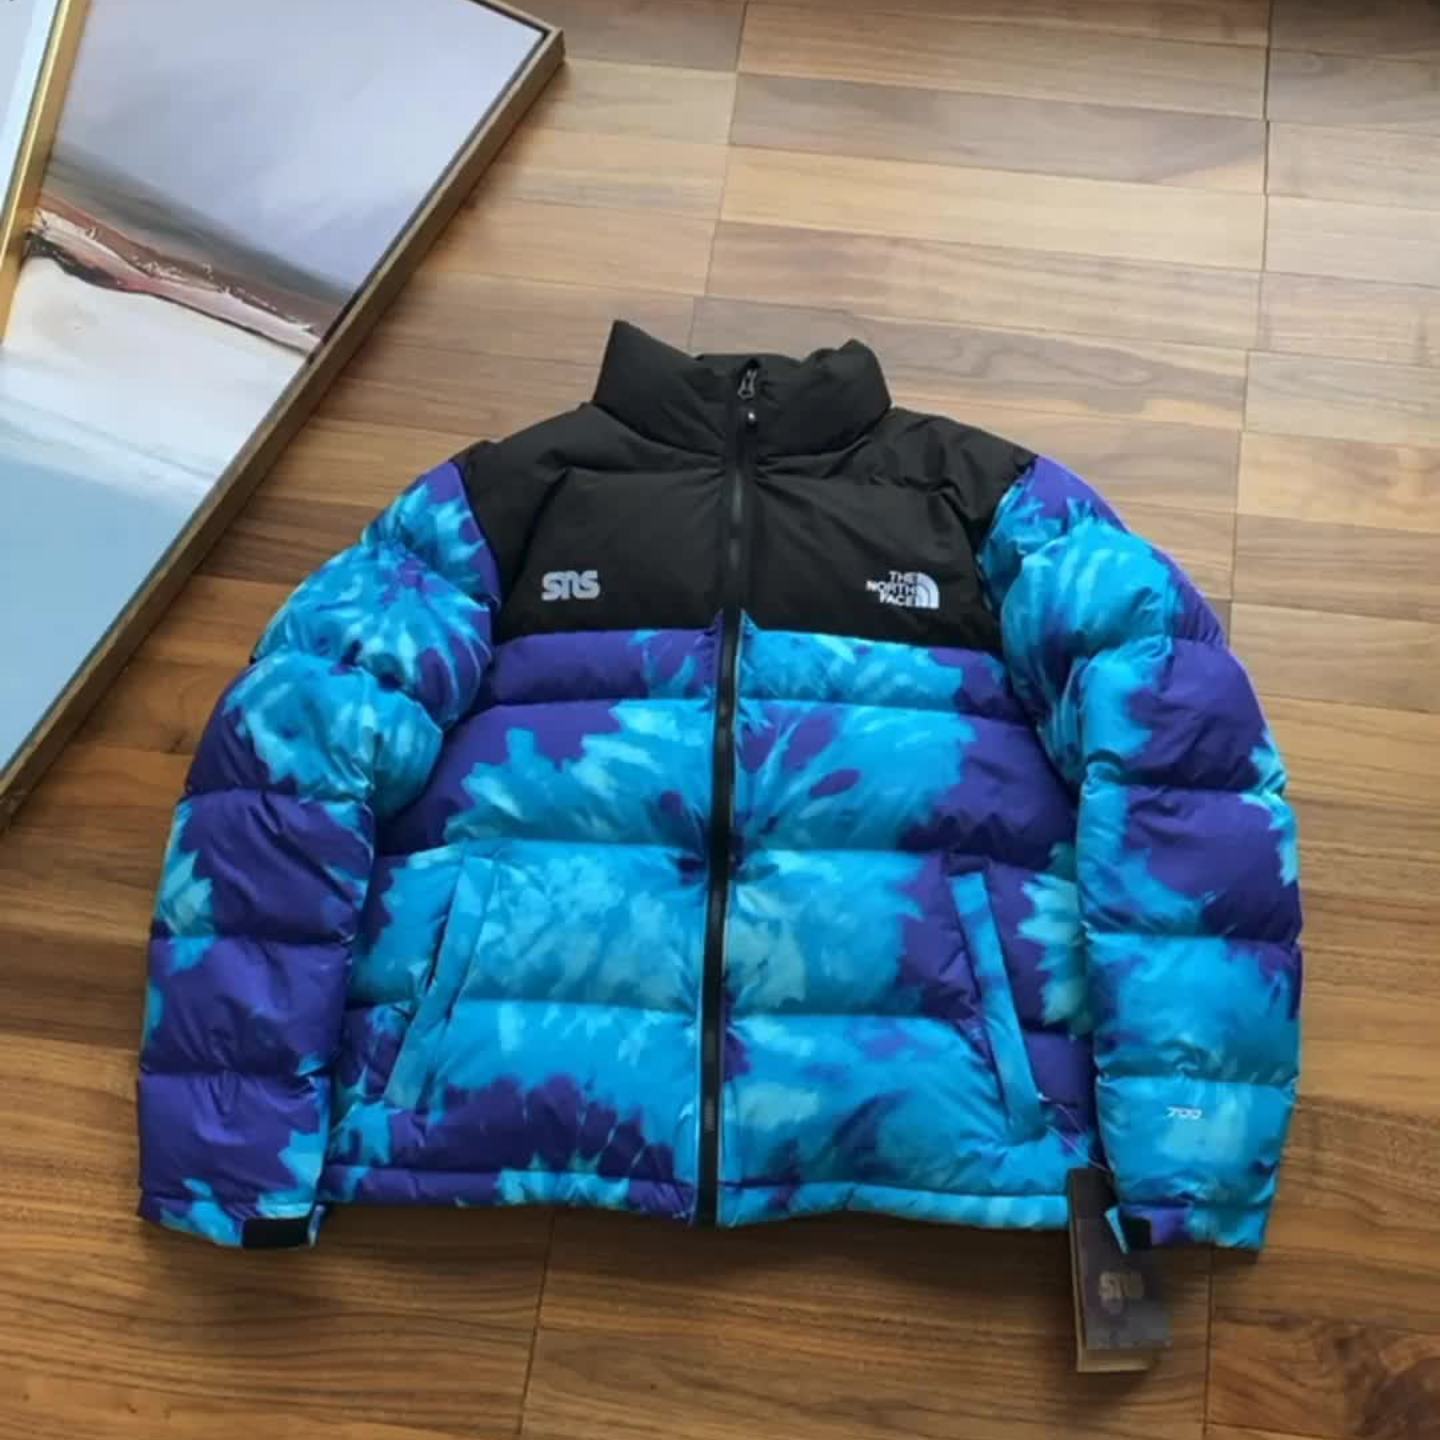 SNS x The North Face Capsule Collection Nuptse Jacket